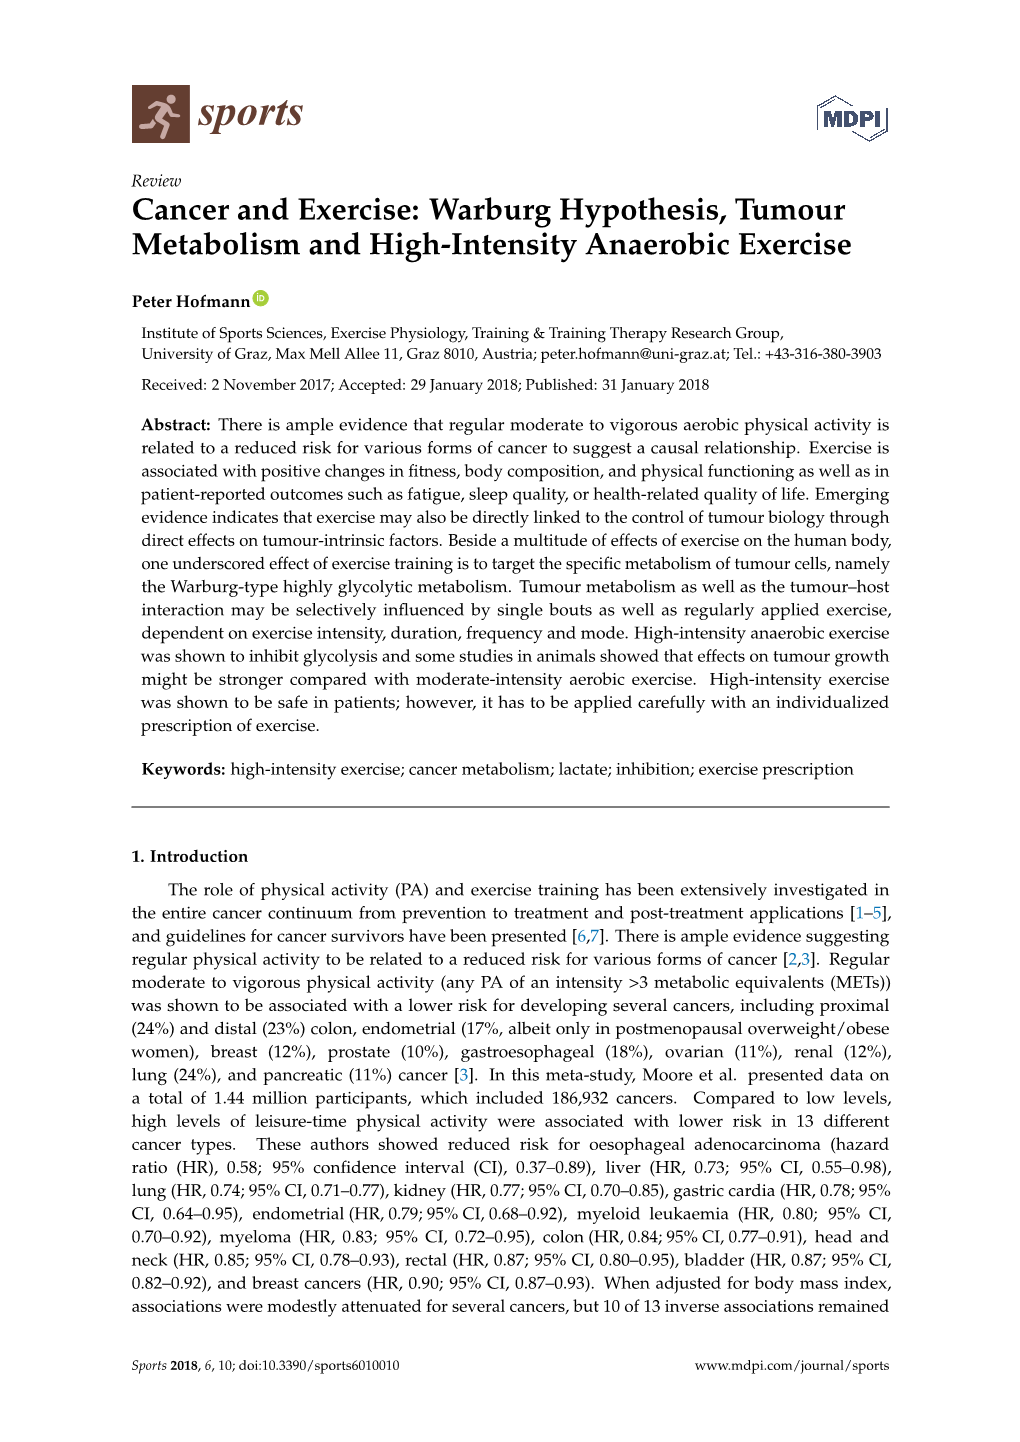 Cancer and Exercise: Warburg Hypothesis, Tumour Metabolism and High-Intensity Anaerobic Exercise